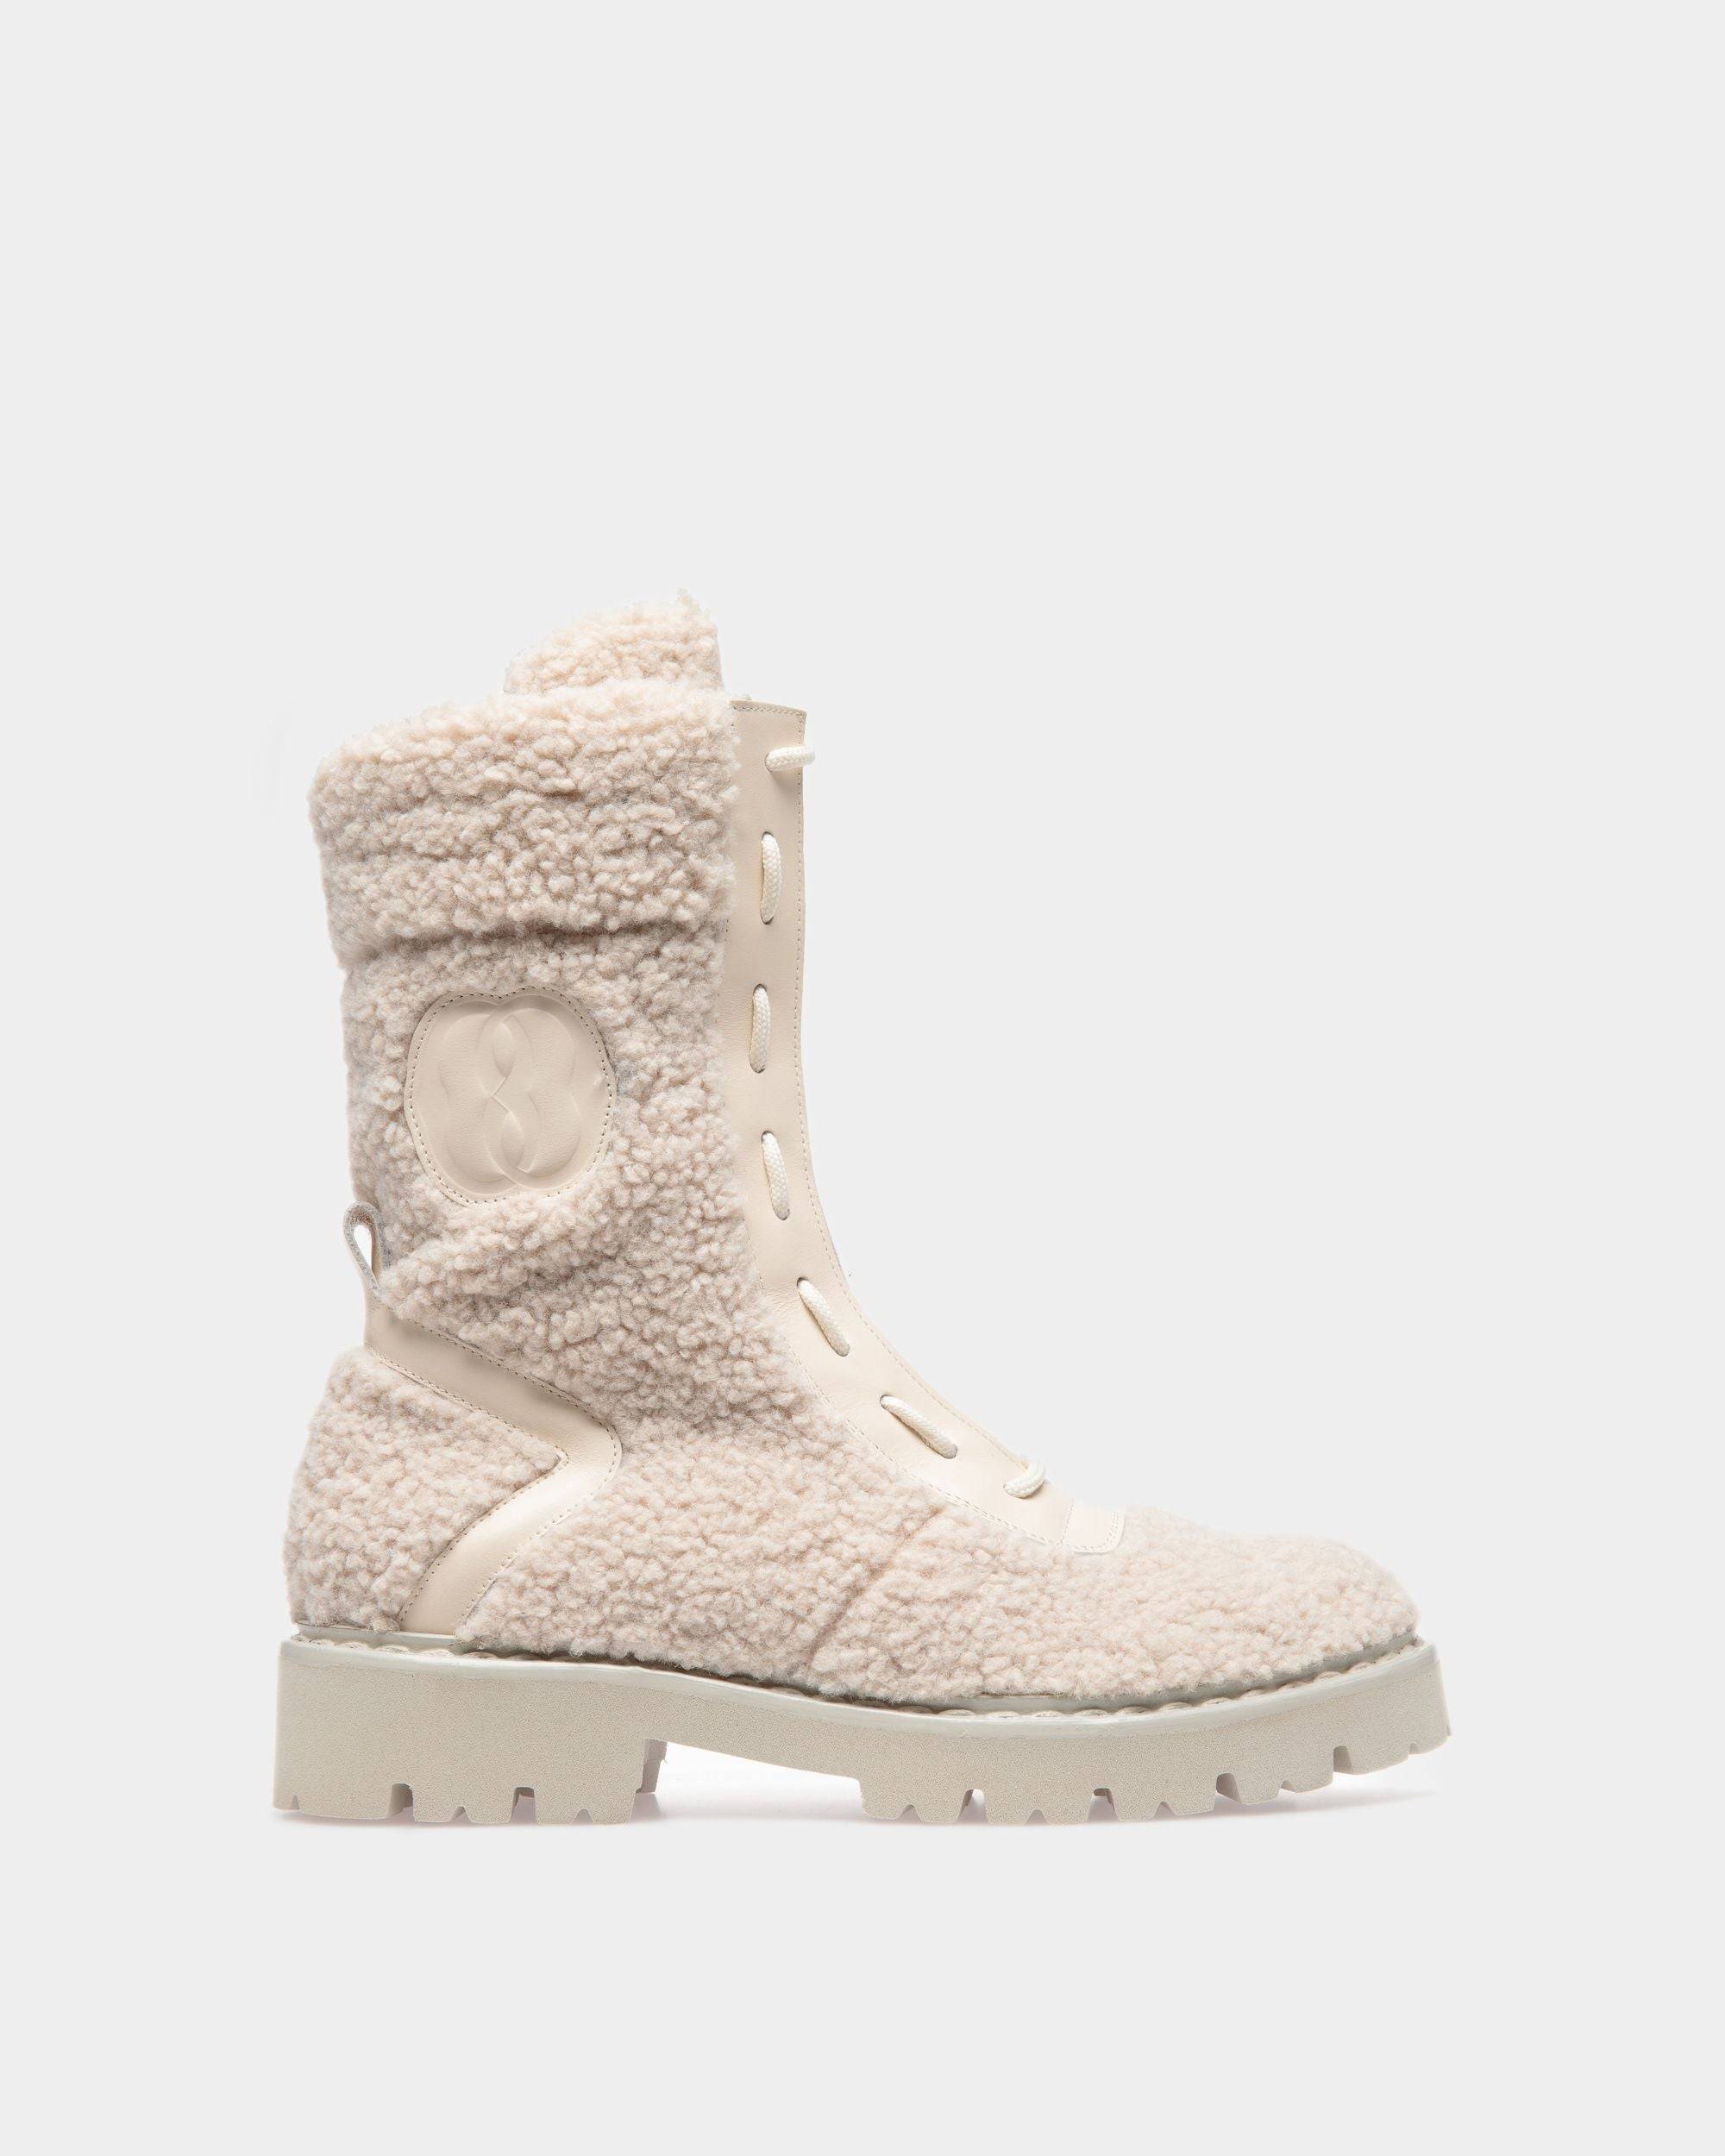 Women's Enga Boots In Bone Leather | Bally | Still Life Side